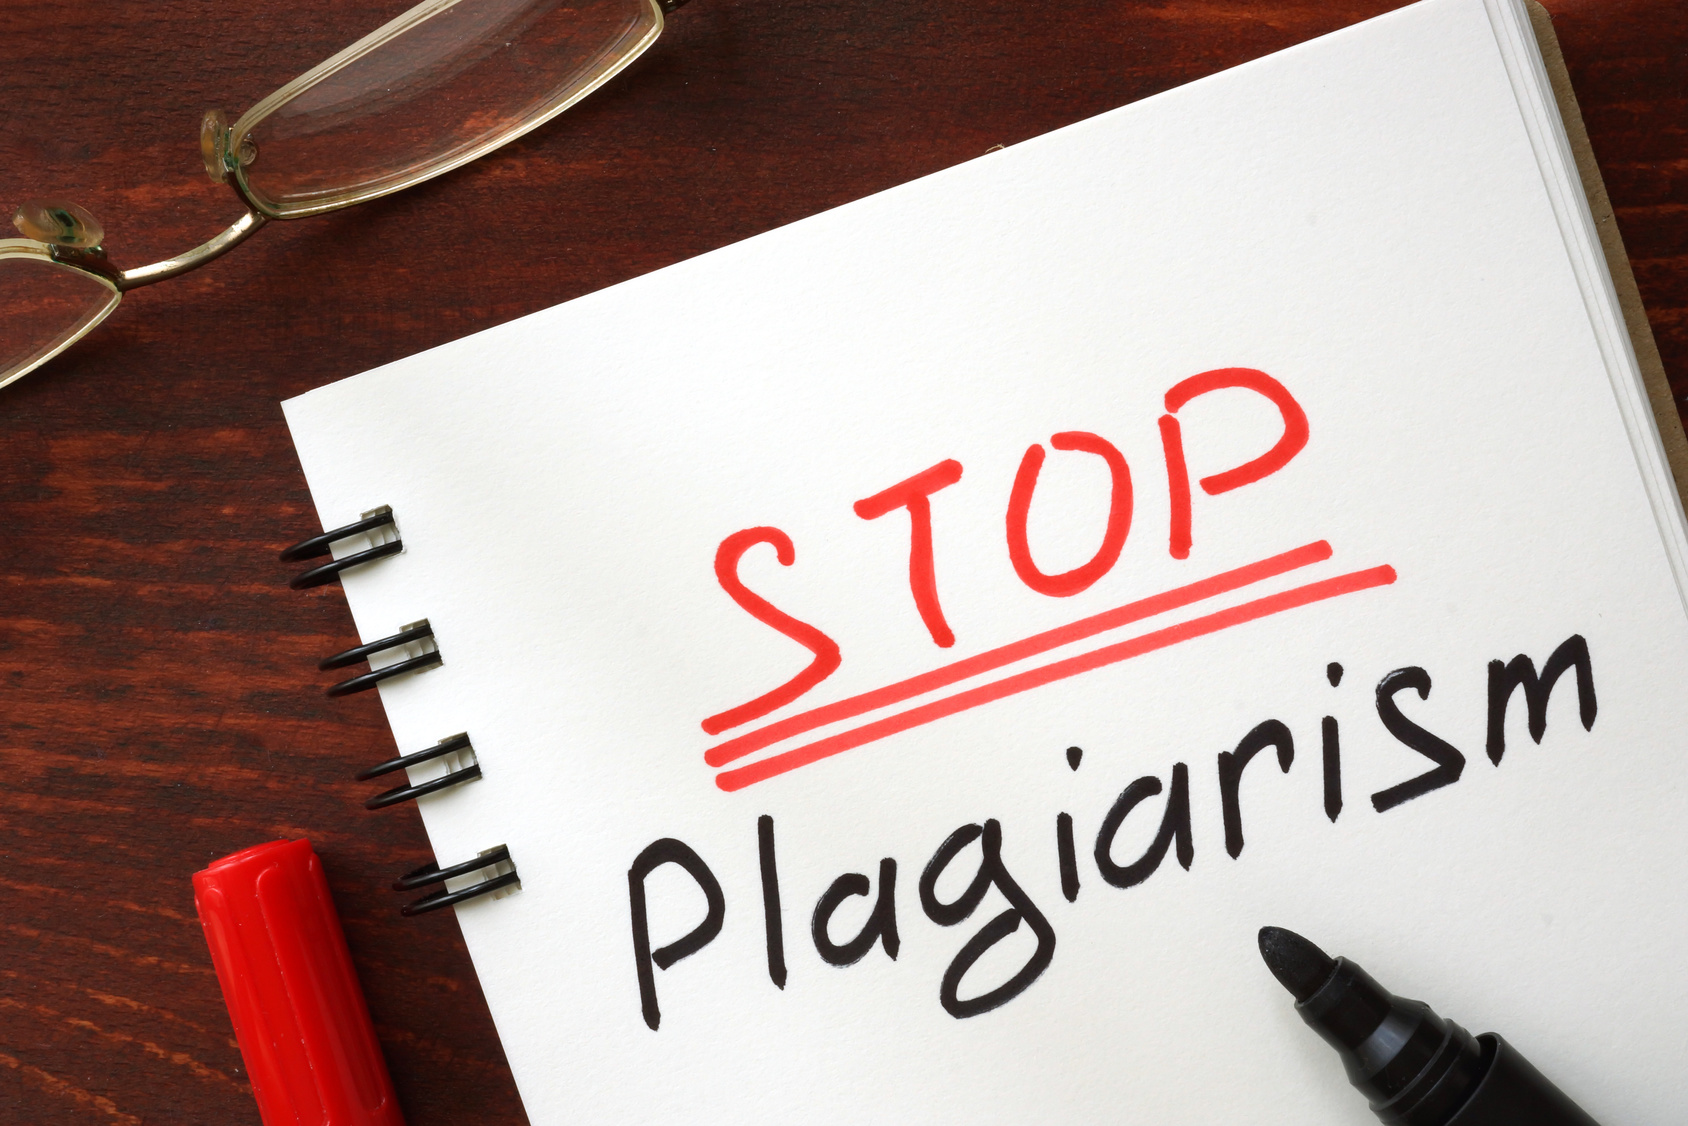 how to avoid plagiarism in research work